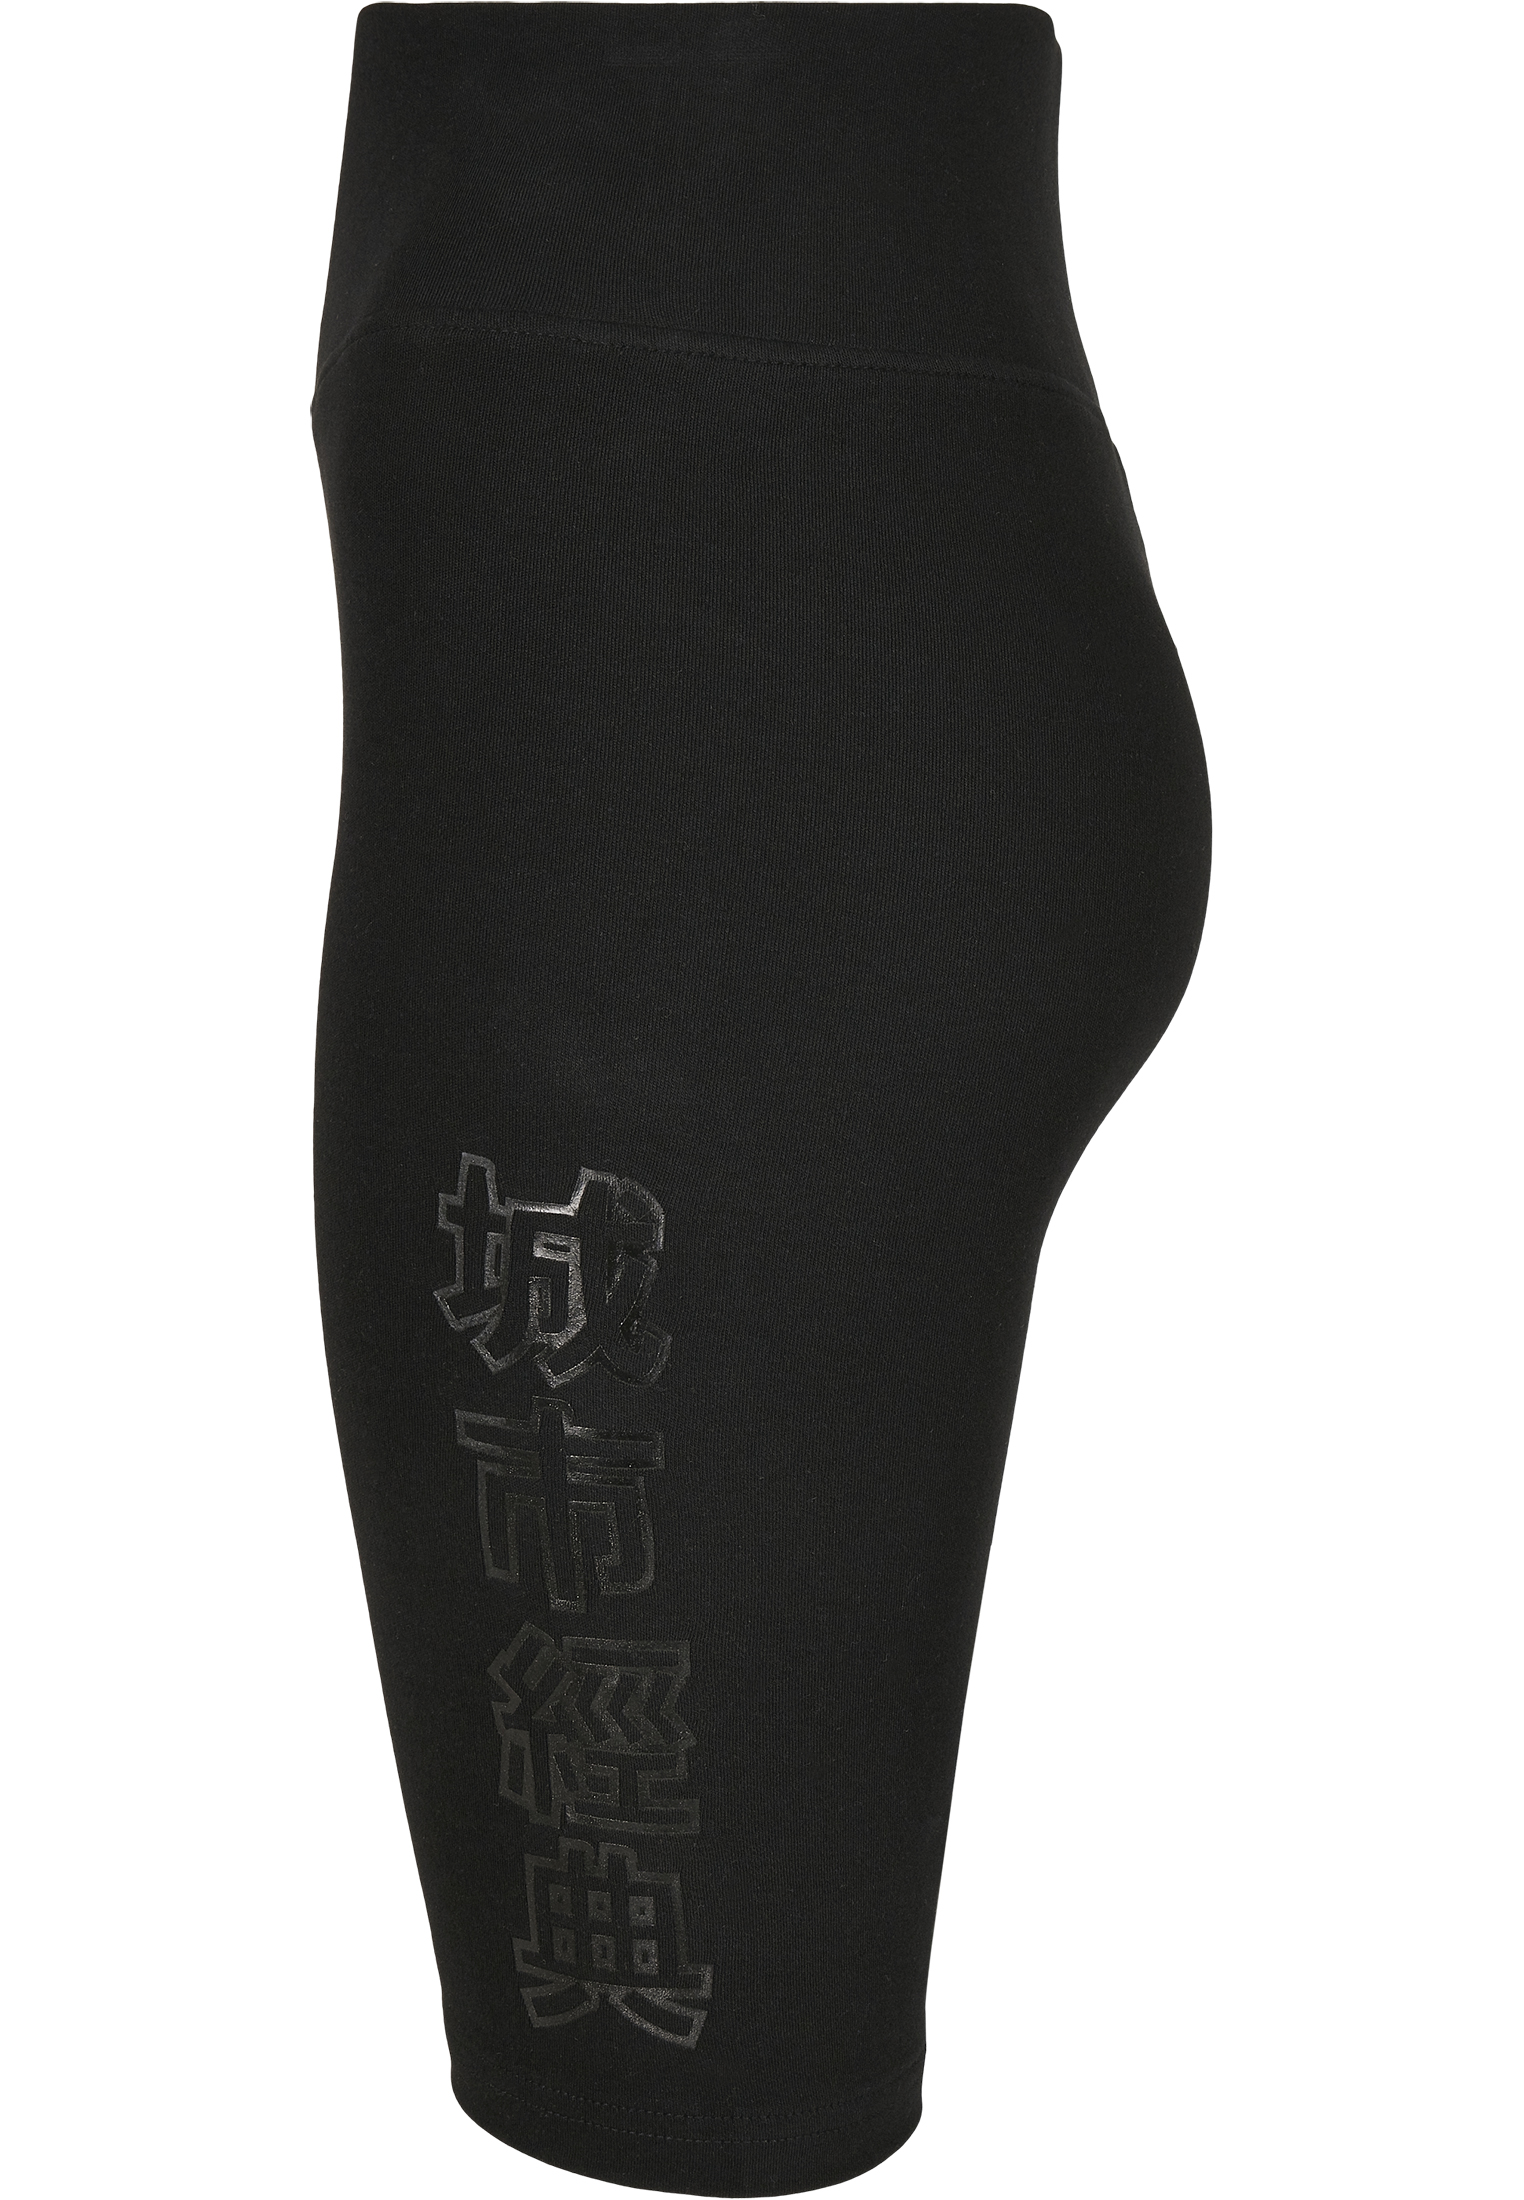  Ladies High Waist Branded Cycle Shorts in Farbe black/black